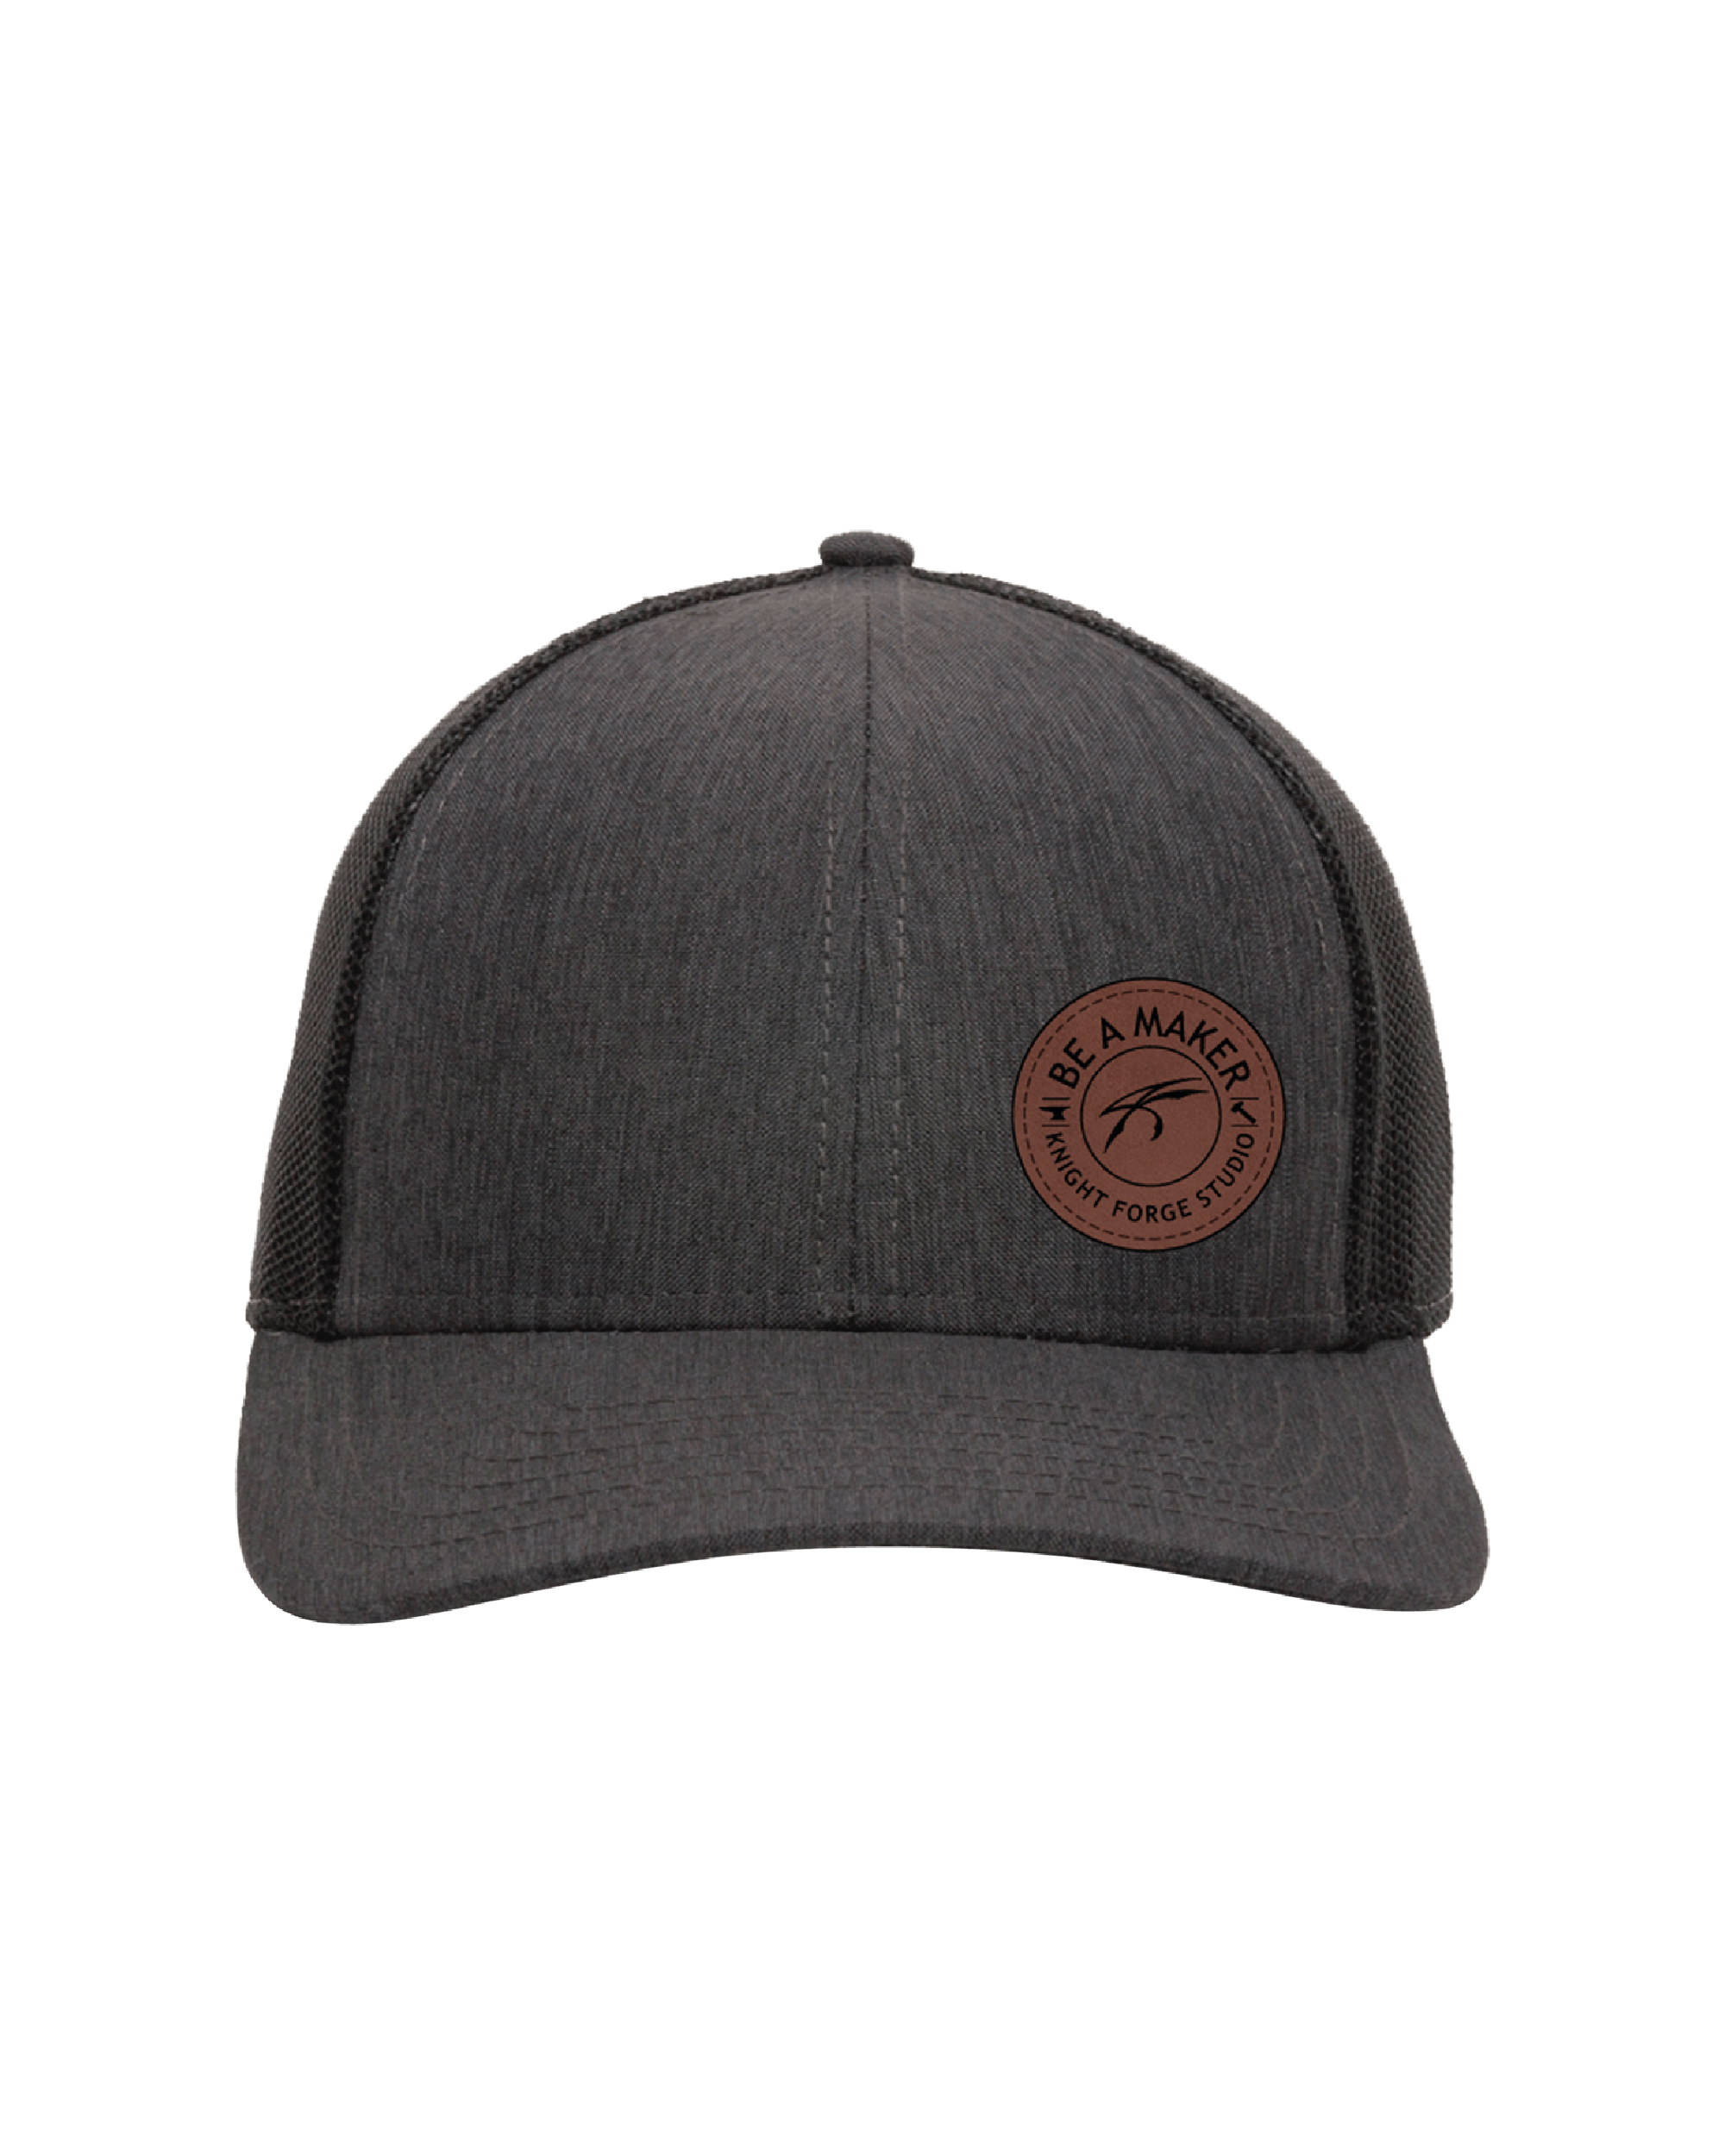 Be A Maker Trucker Hat - Limited Edition